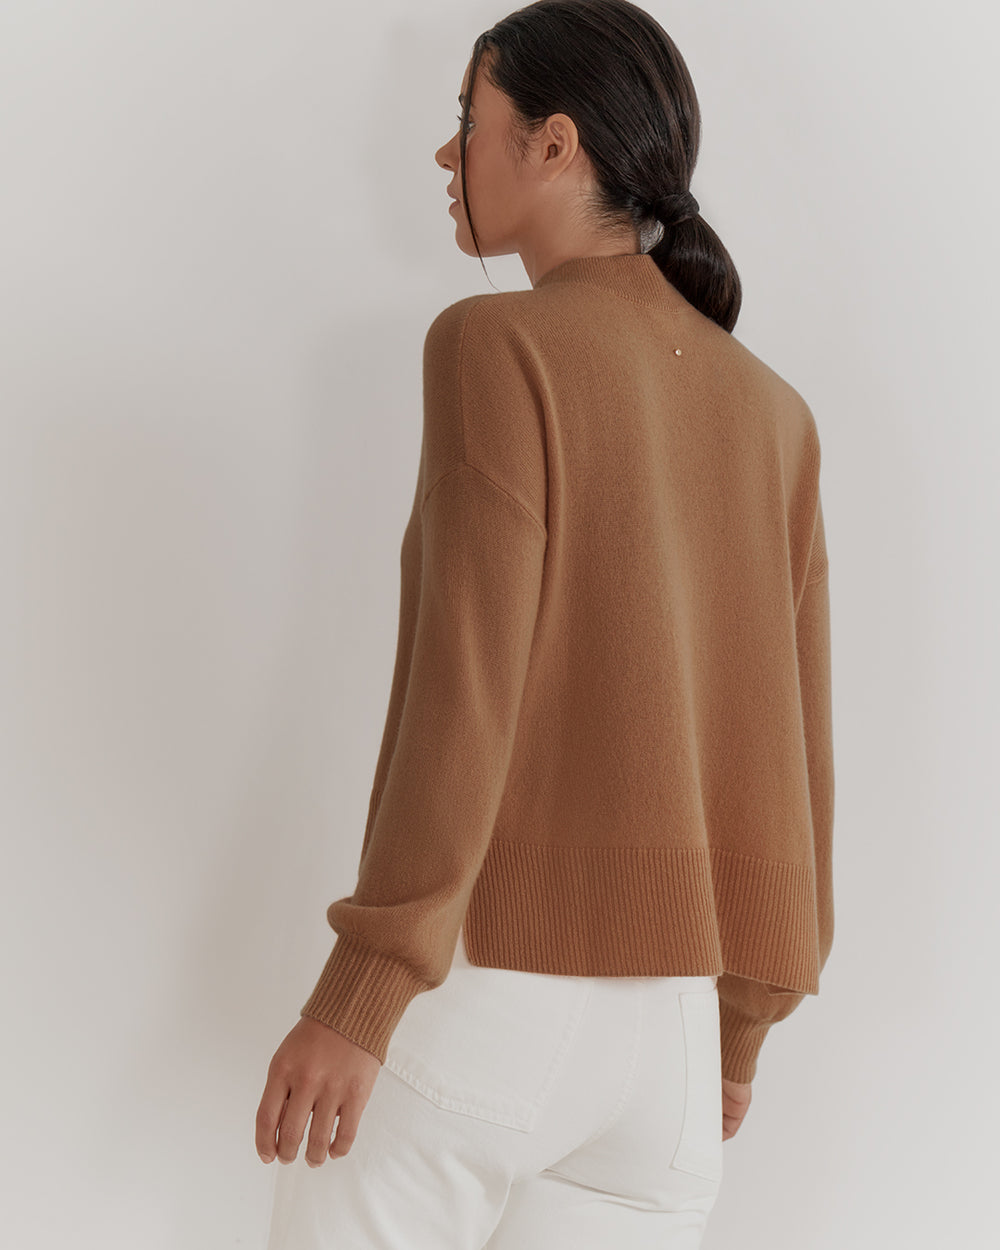 Woman in sweater and pants, viewed from the back, looking to the side.